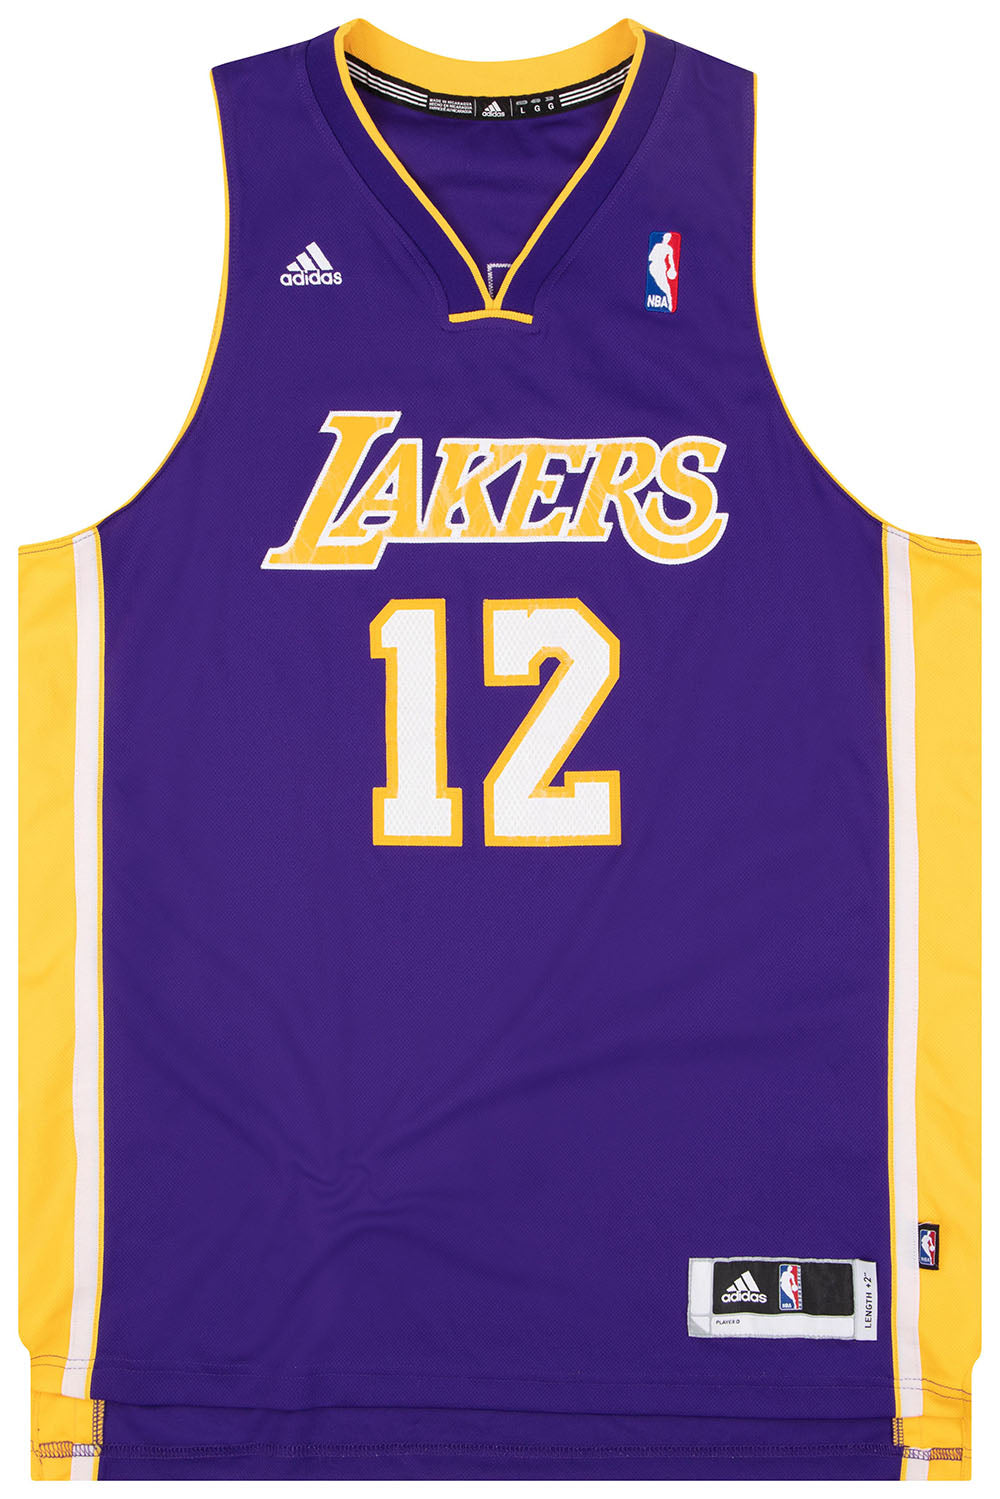 Jersey #12 - All Things Lakers - Los Angeles Times